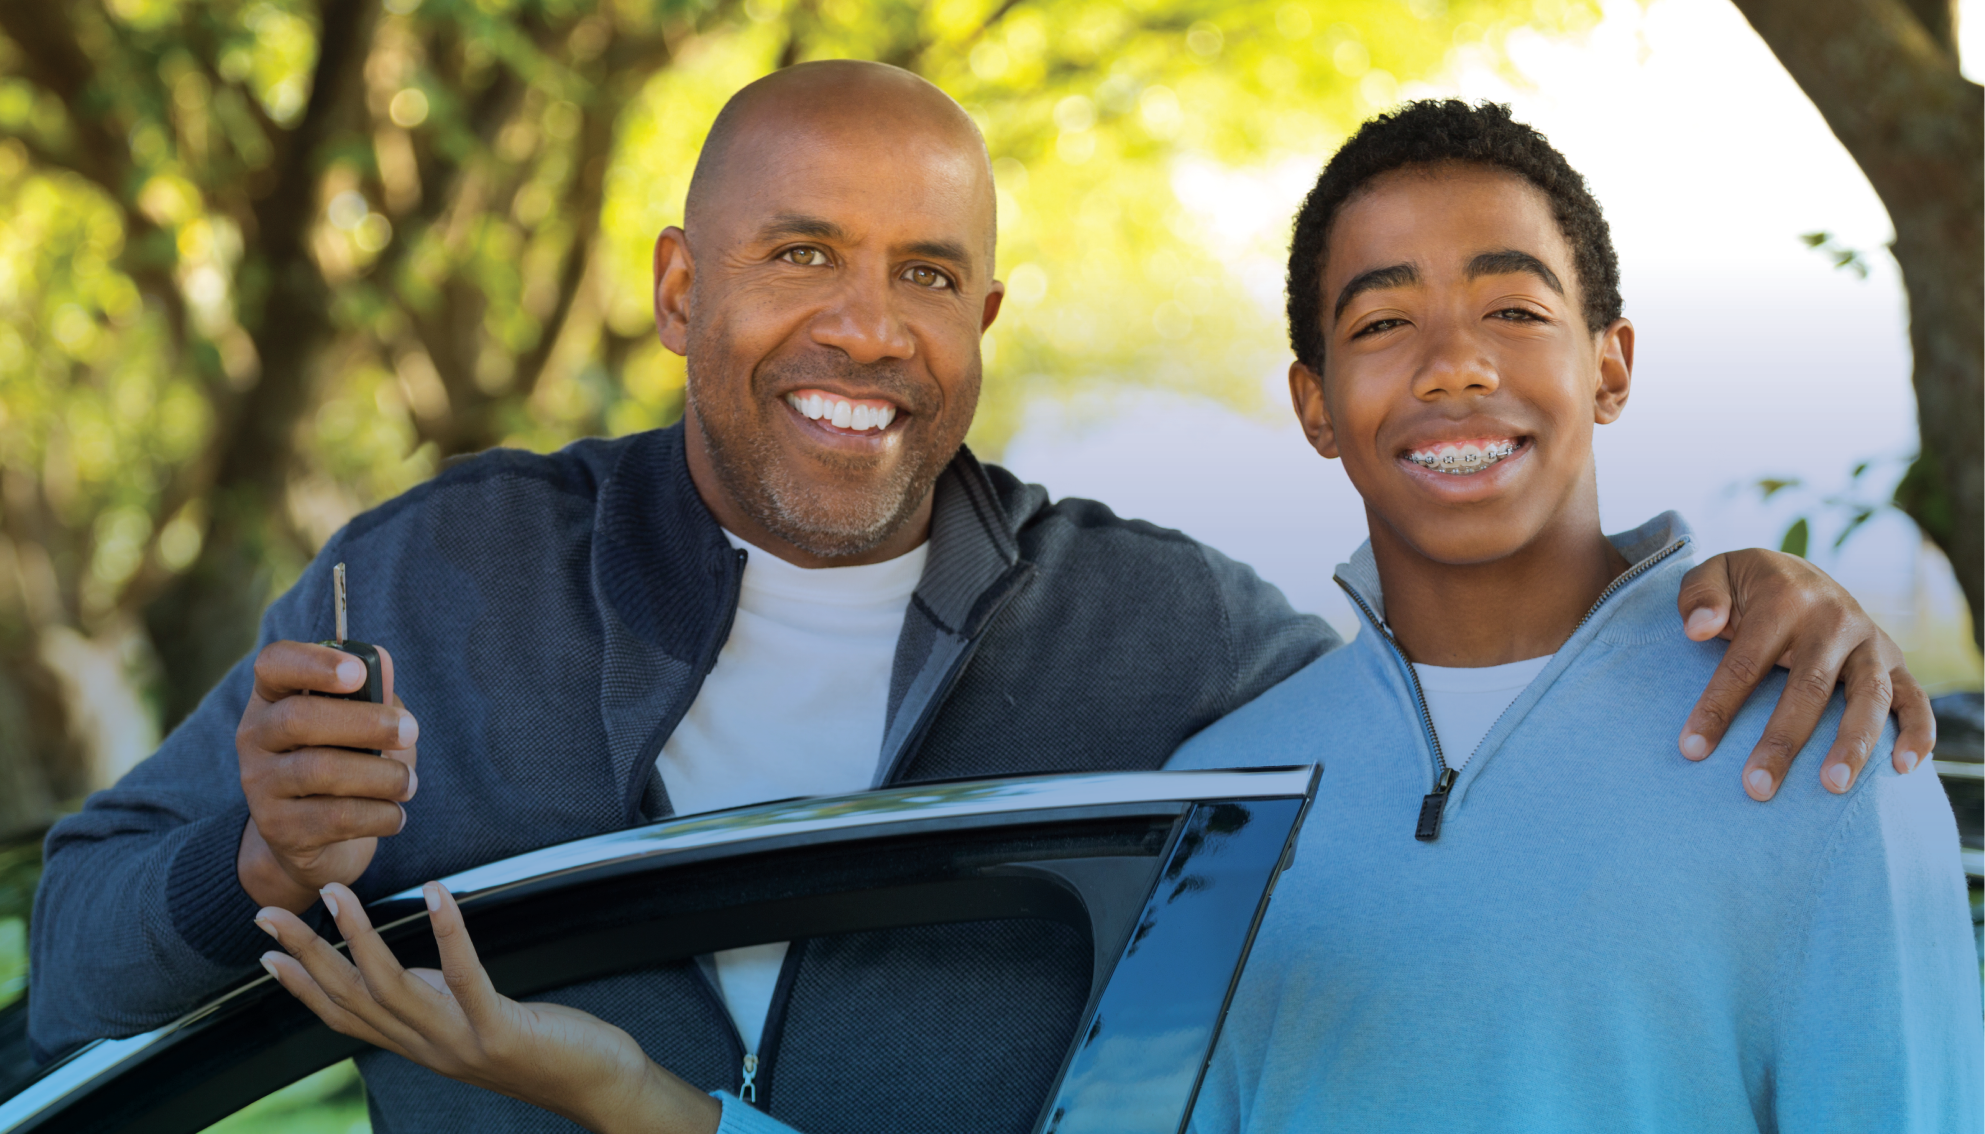 Dad handing over car keys to his son for safe teen driving